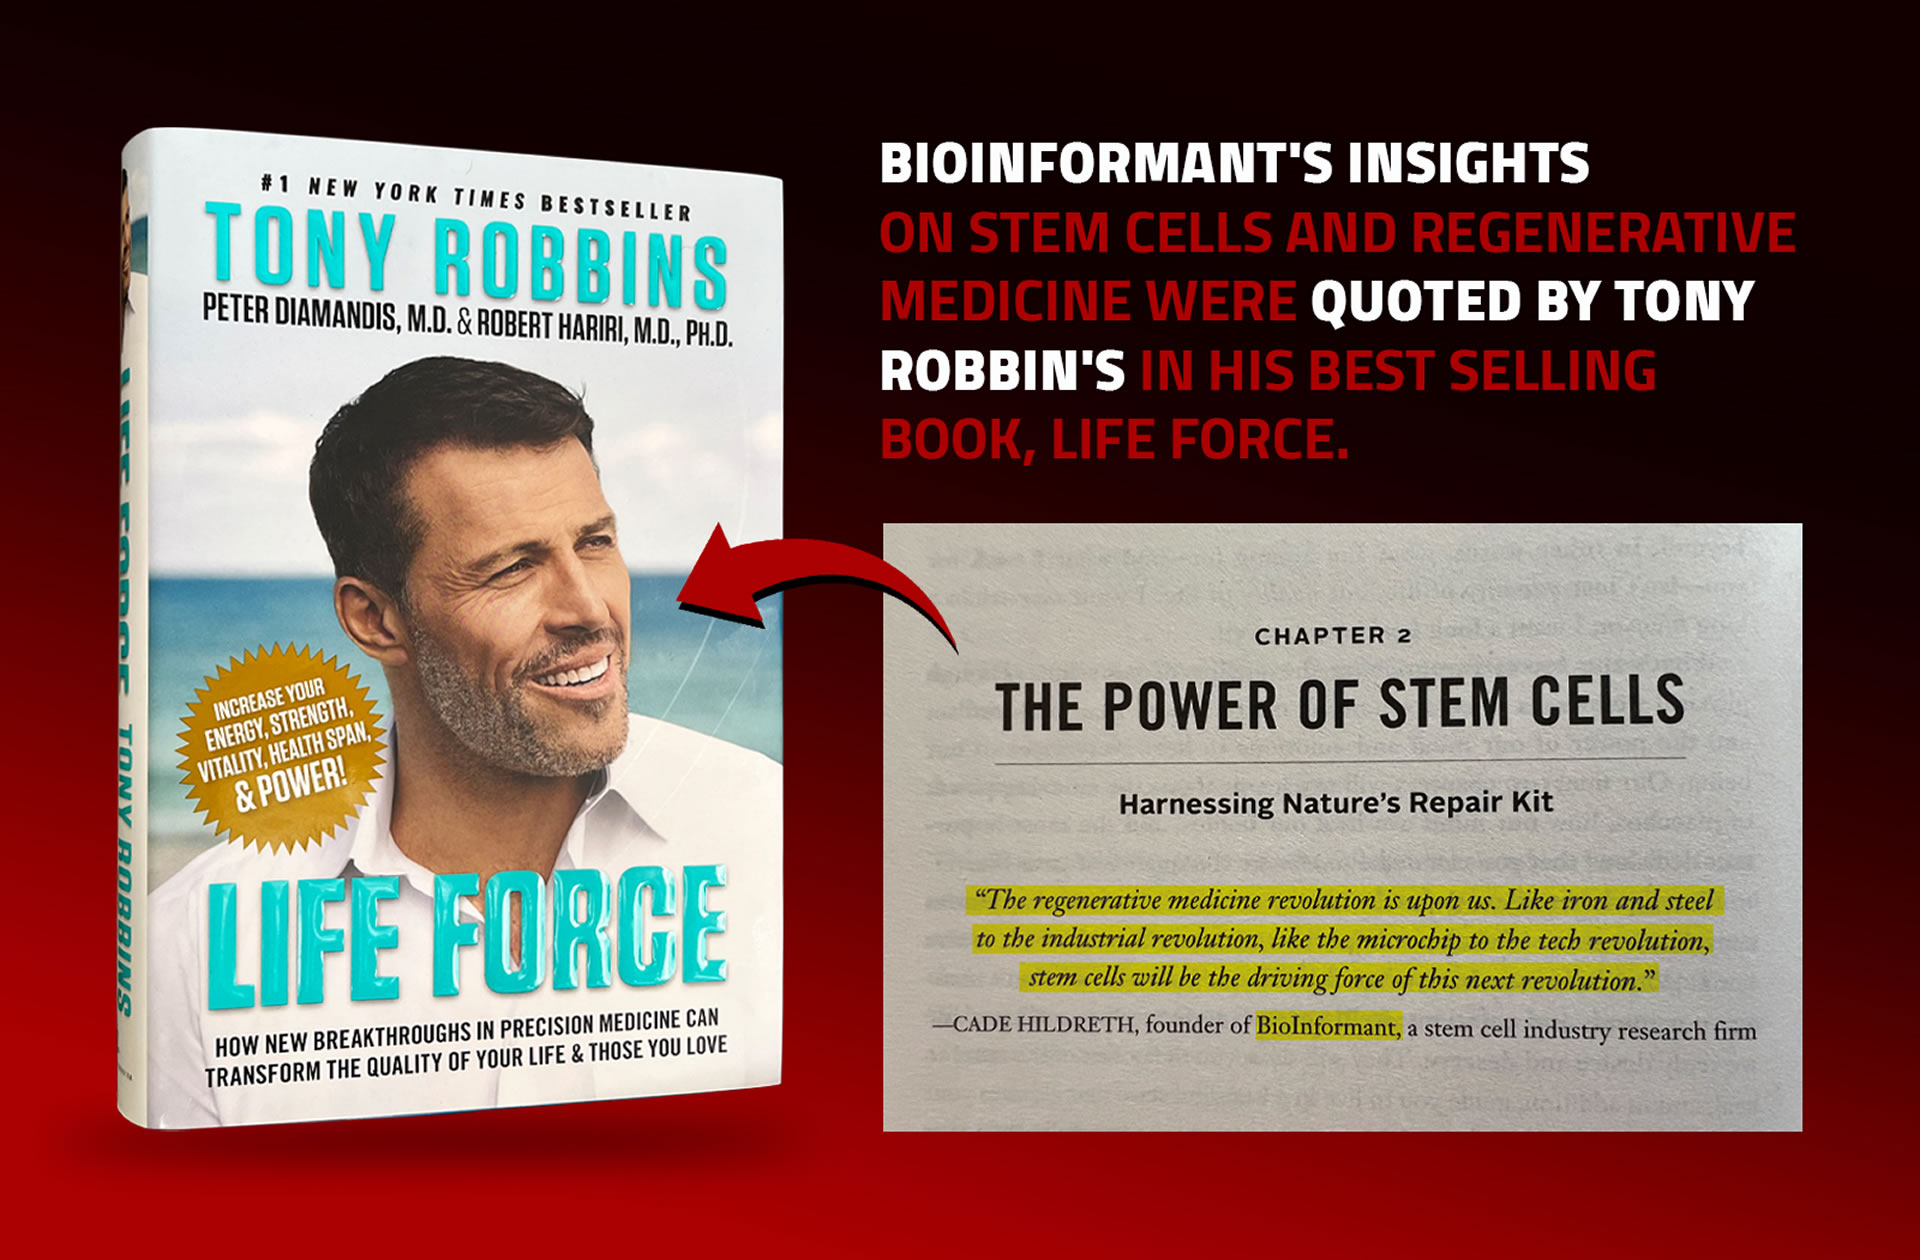 BioInformant quote in LifeForce book by Tony Robbins